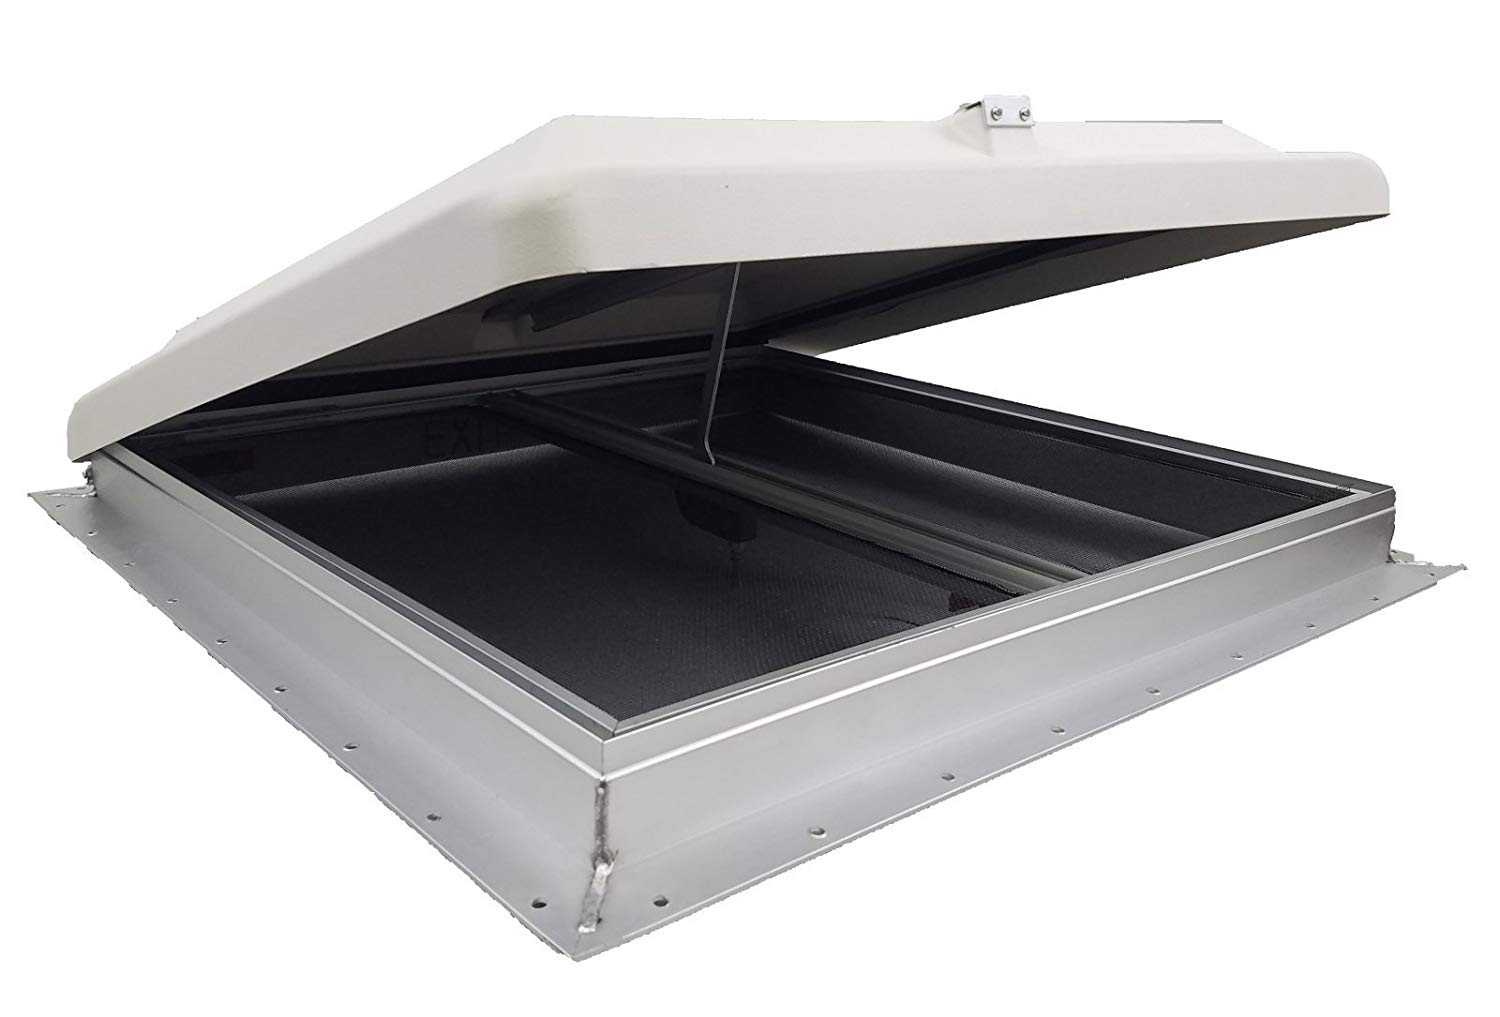 Hengs 68631-1 26 Inch x 26 Inch Super Exit Dome Escape Hatch with Garnish and White Lid